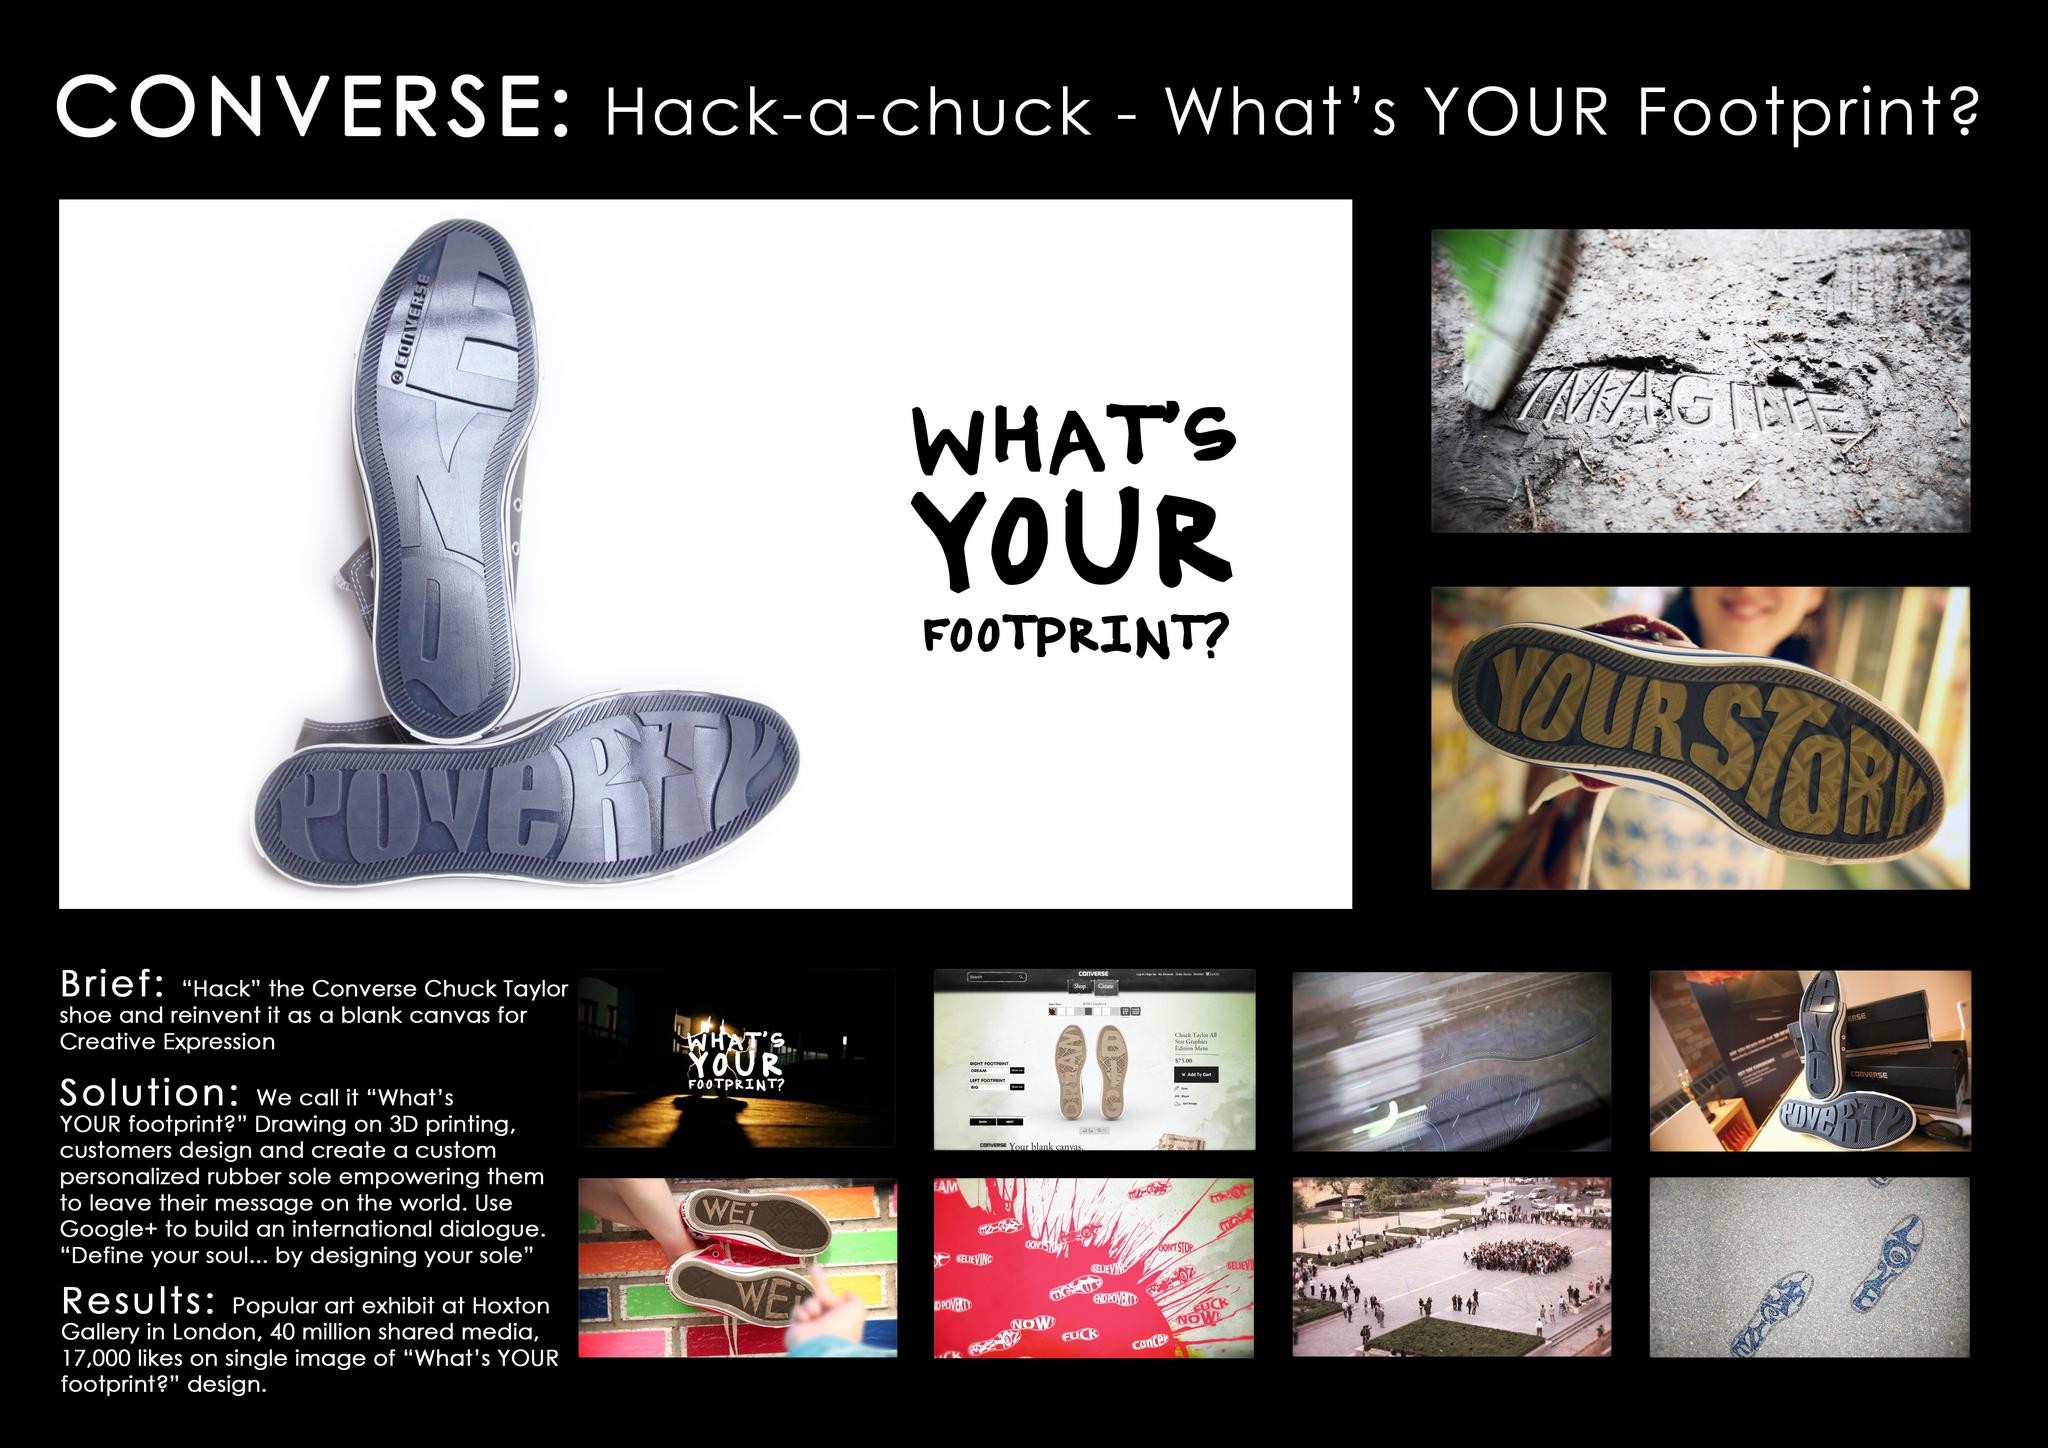 HACK-A-CHUCK - WHAT'S YOUR FOOTPRINT?